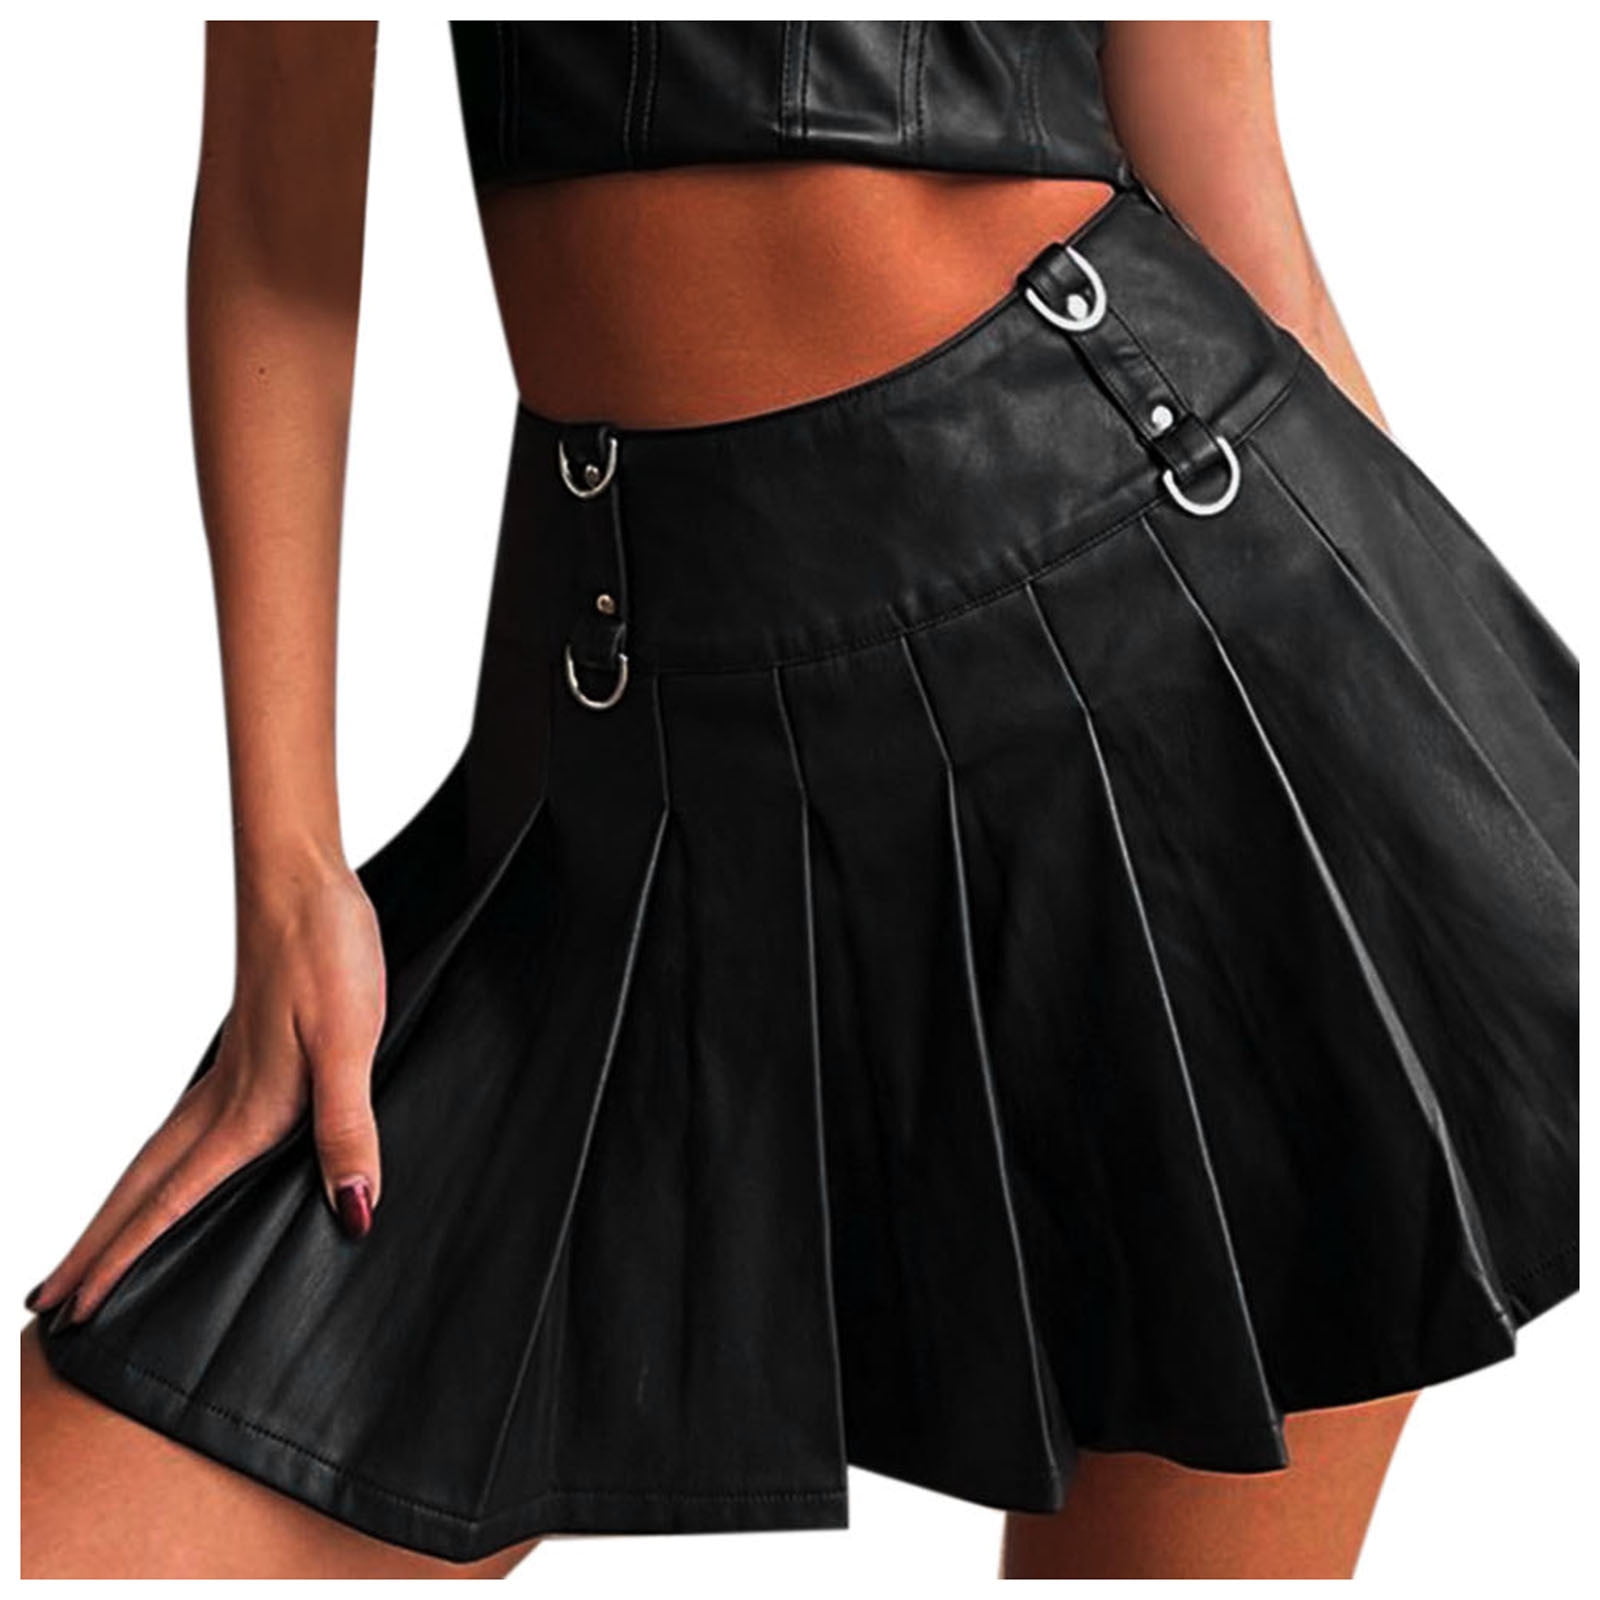 HSMQHJWE Tennis Skort With Pockets Plus Size Leather Skirt Women Floral  Print Elastic Waist Band Midi Skirt Double Layer Puffy Princess Skirt  Ruched Skirt Leggings Plus Size 